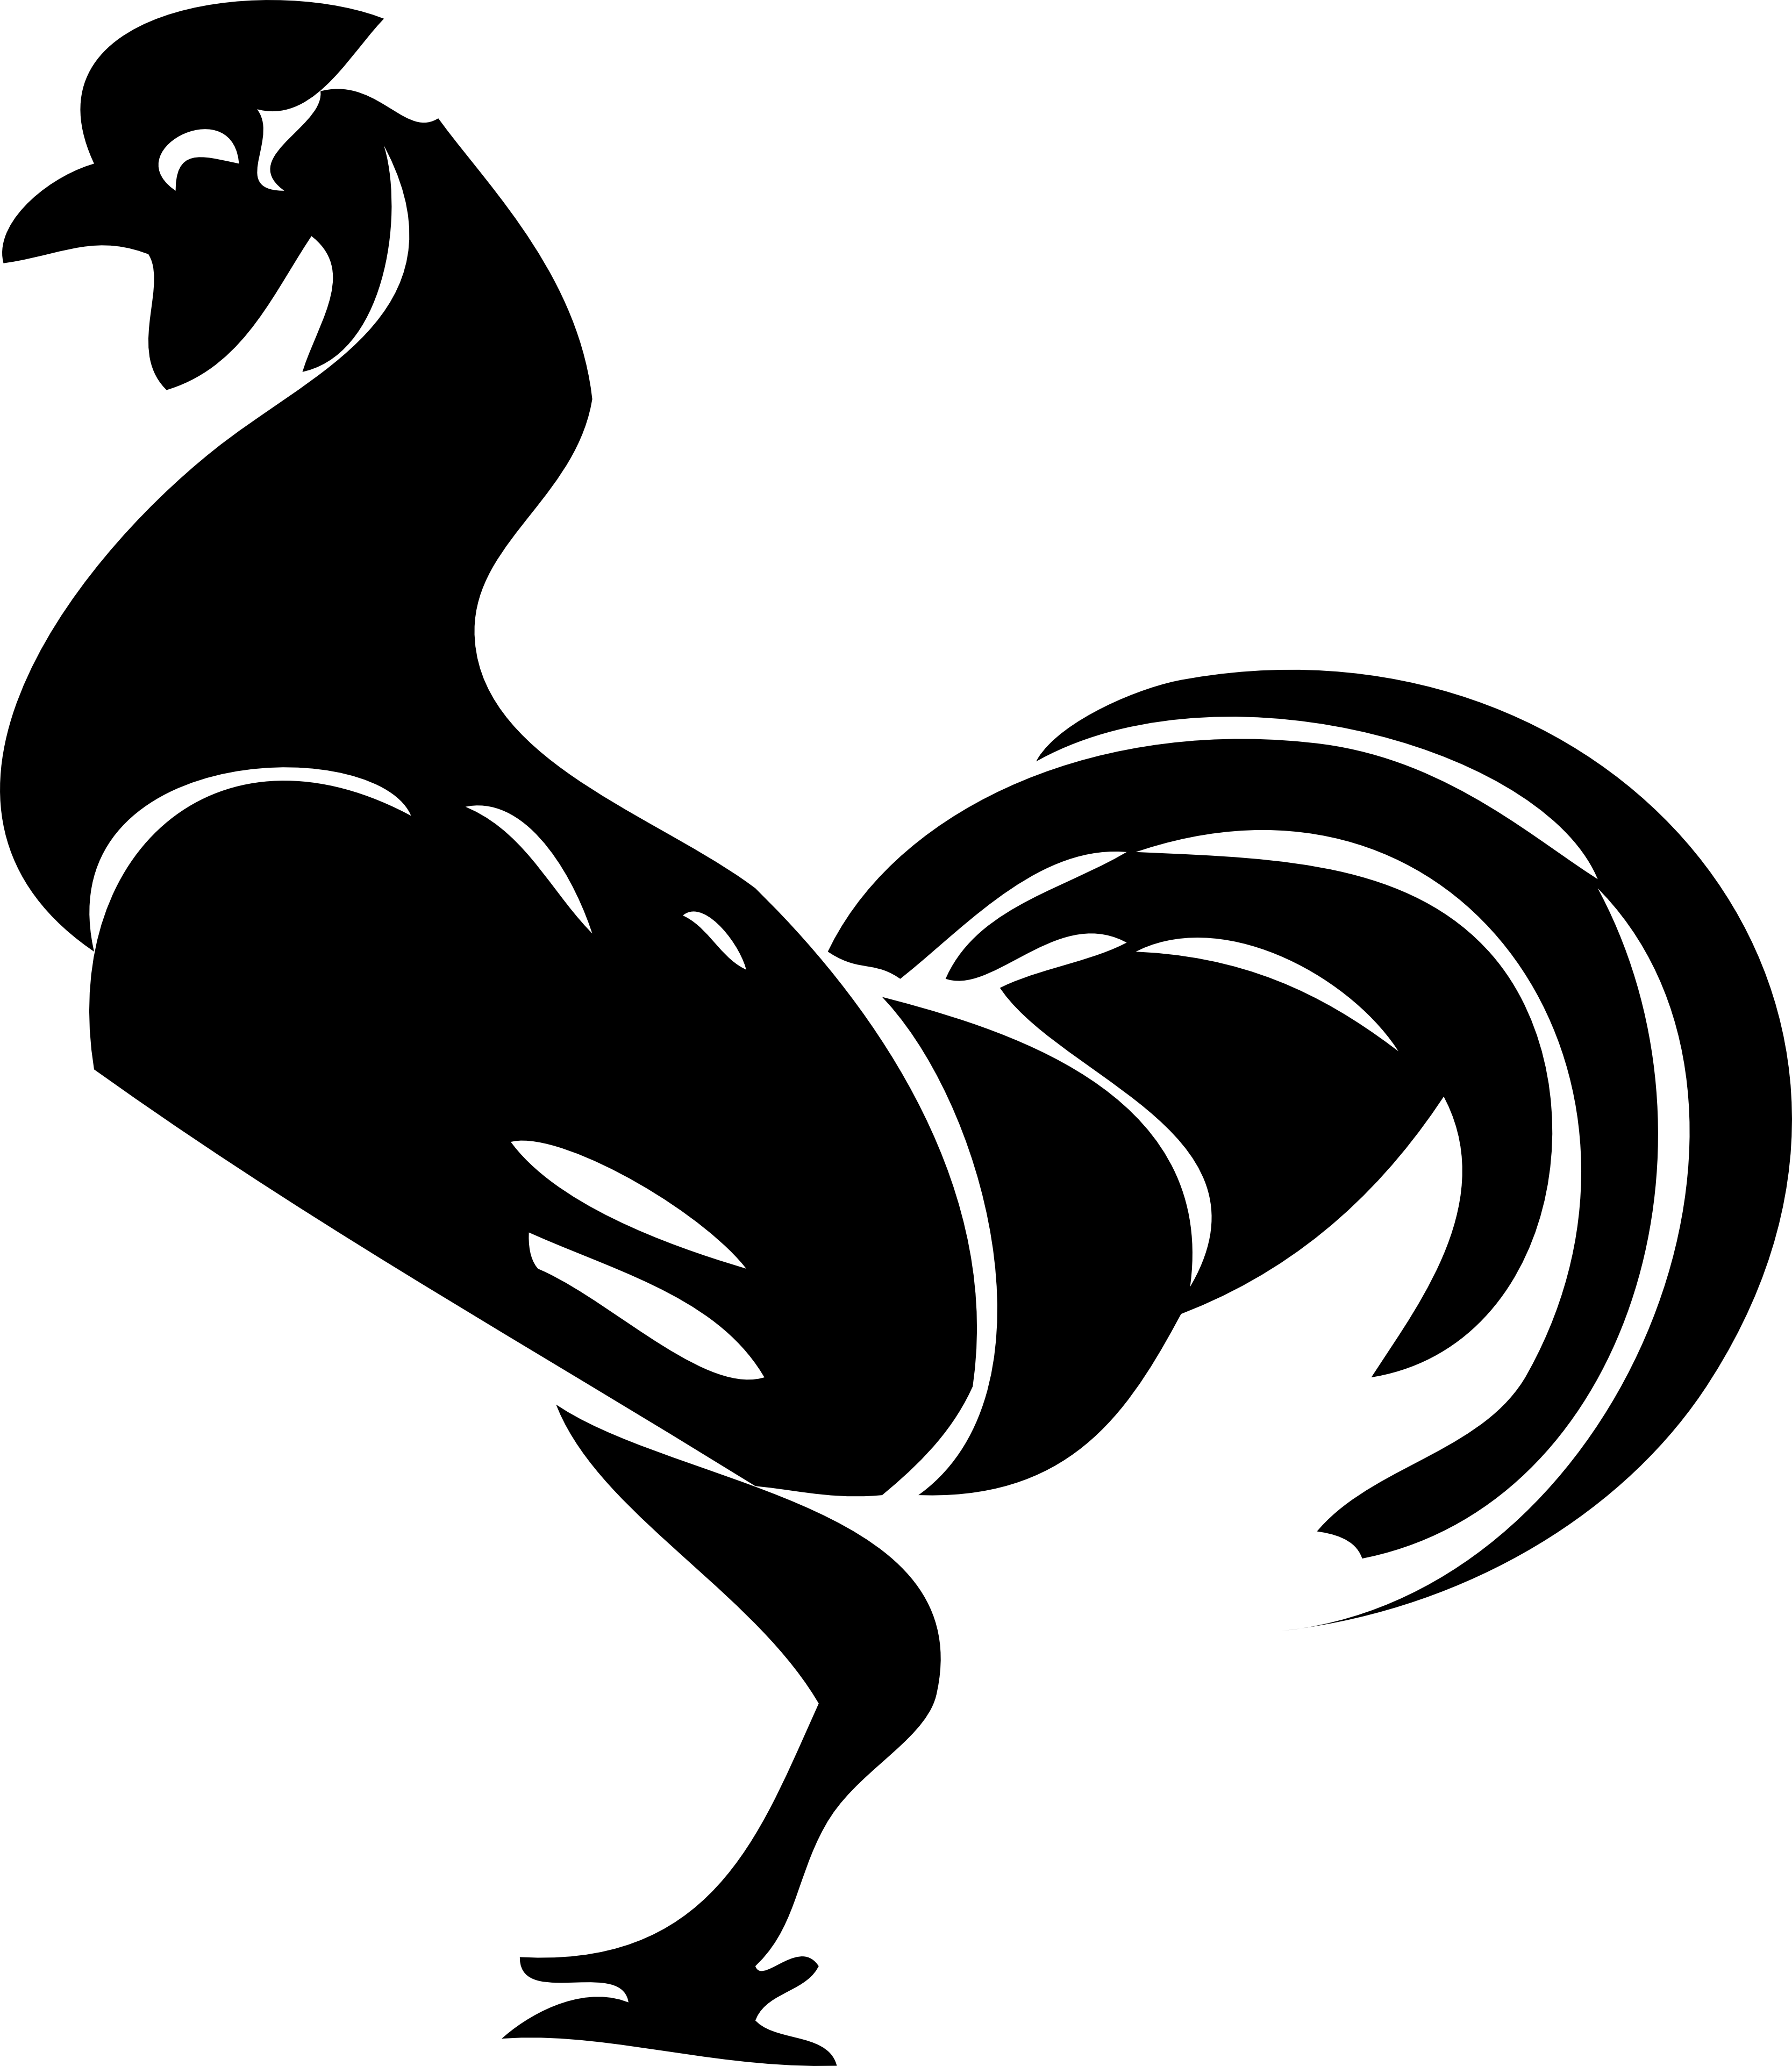 Black and White Rooster Logo - Black rooster clipart kid 4 - Clipartix